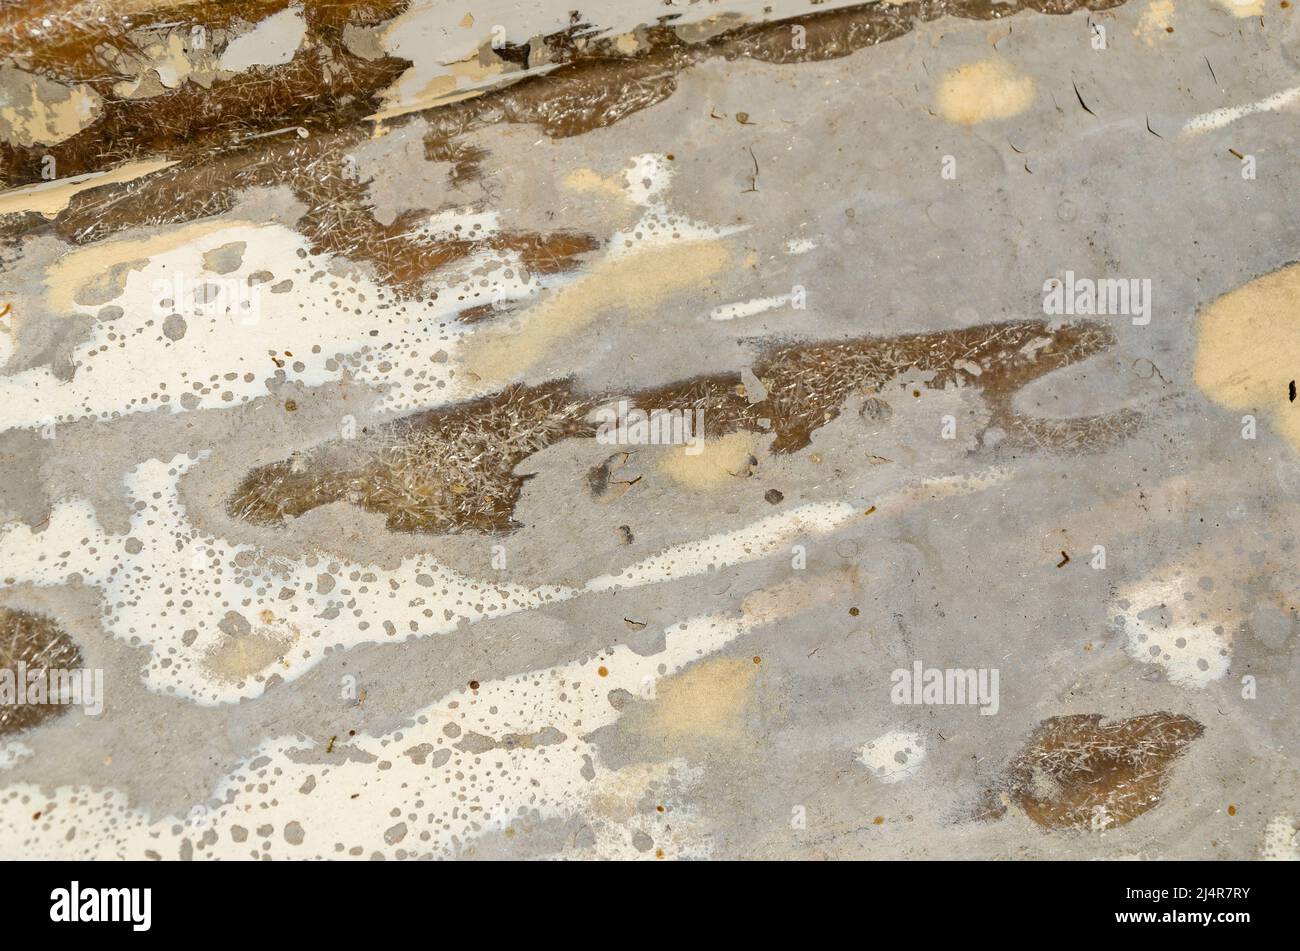 Background with grey, white, and brown rough surfaces - close-up Stock Photo